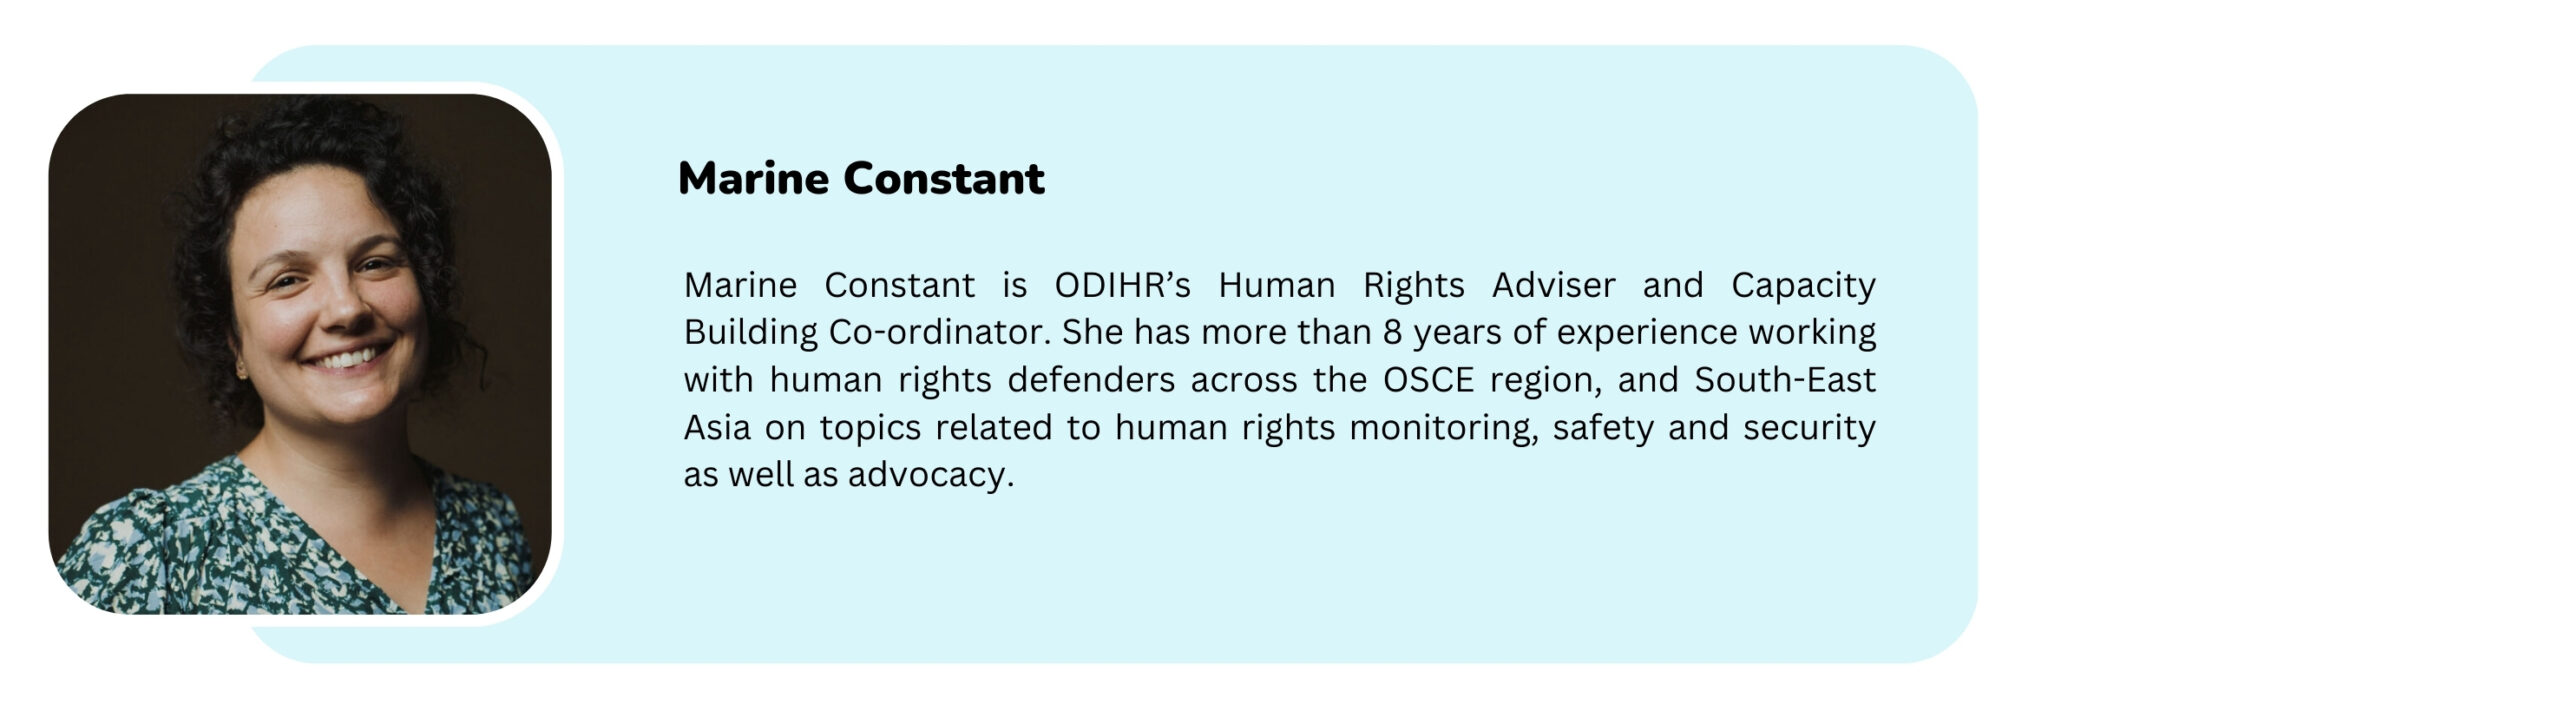 Picture of a trainer with the text "Marine Constant is ODIHR’s Human Rights Adviser and Capacity Building Co-ordinator. She has more than 8 years of experience working with human rights defenders across the OSCE region, and South-East Asia on topics related to human rights monitoring, safety and security as well as advocacy."
